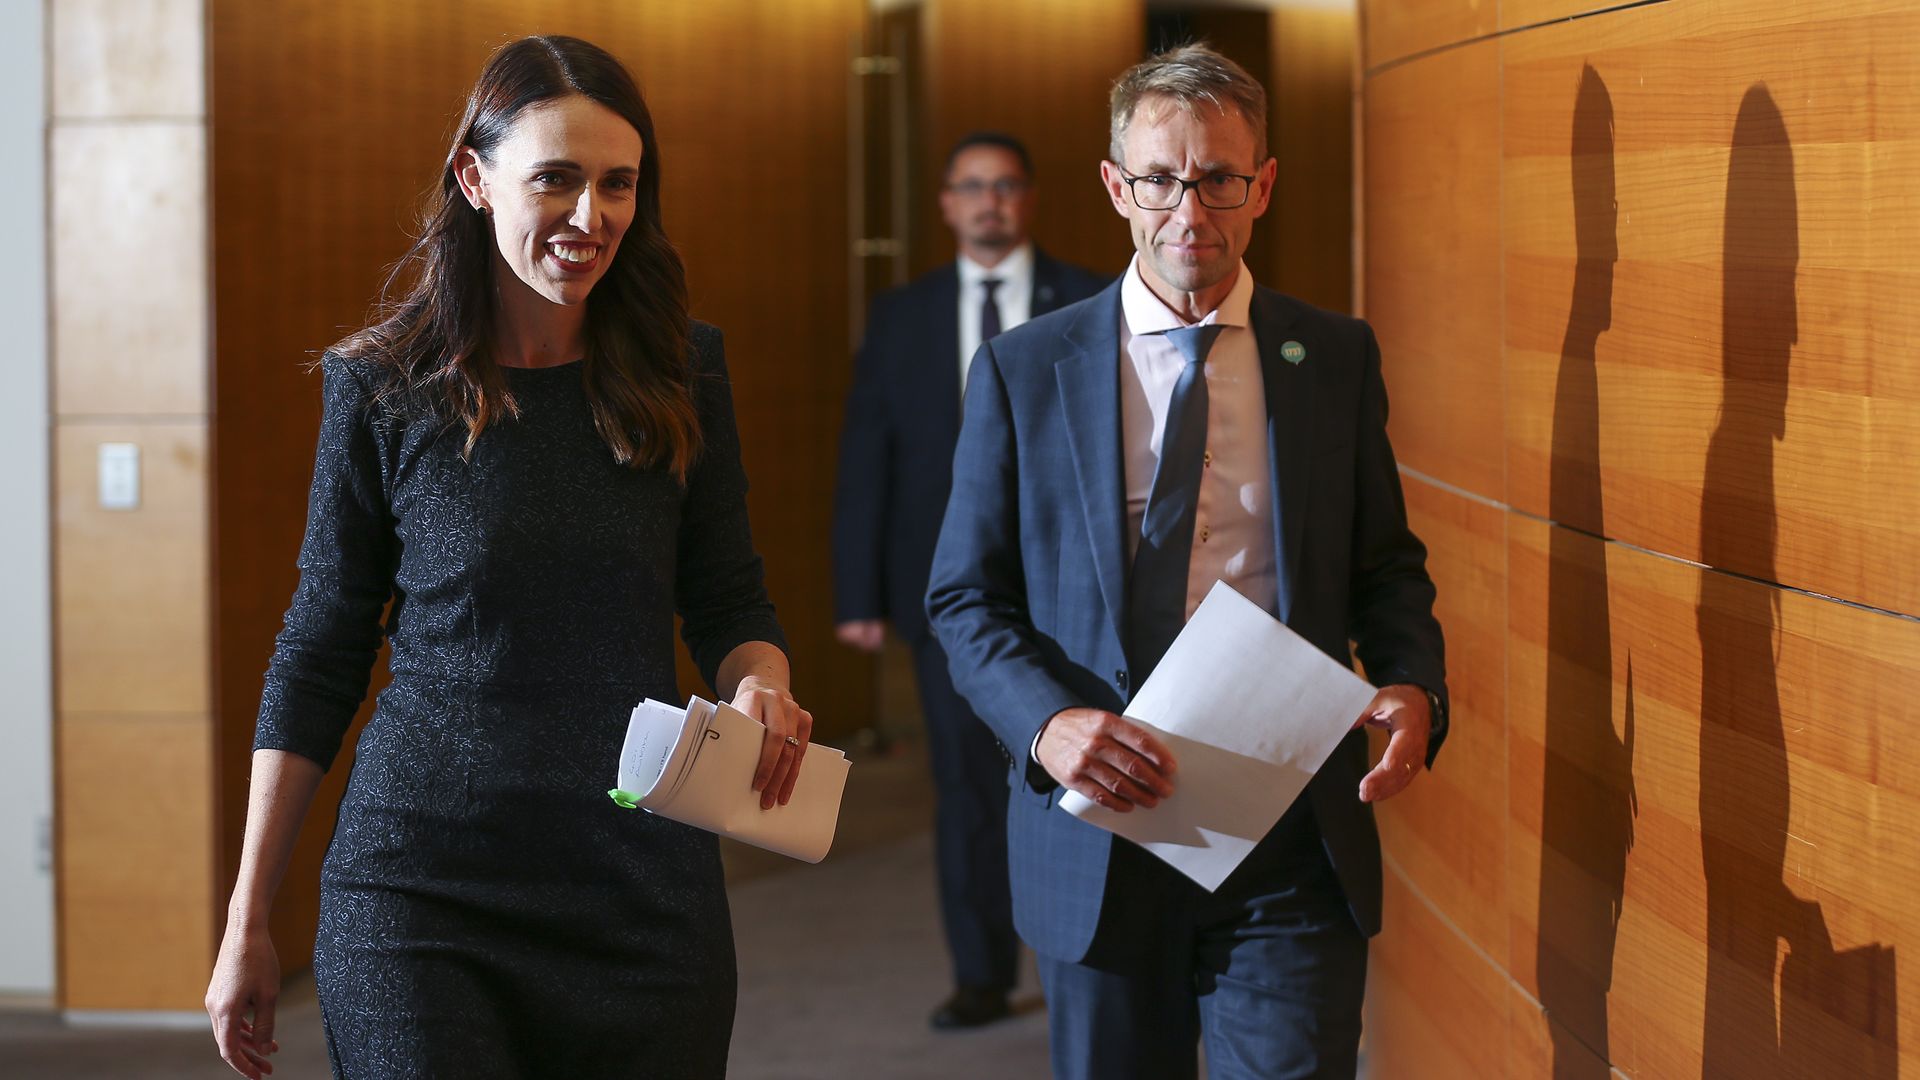 Prime Minister Jacinda Ardern and Director-General of Health Dr Ashley Bloomfield arrive at a press conference at Parliament on February 15, 2021 in Wellington, New Zealand. 